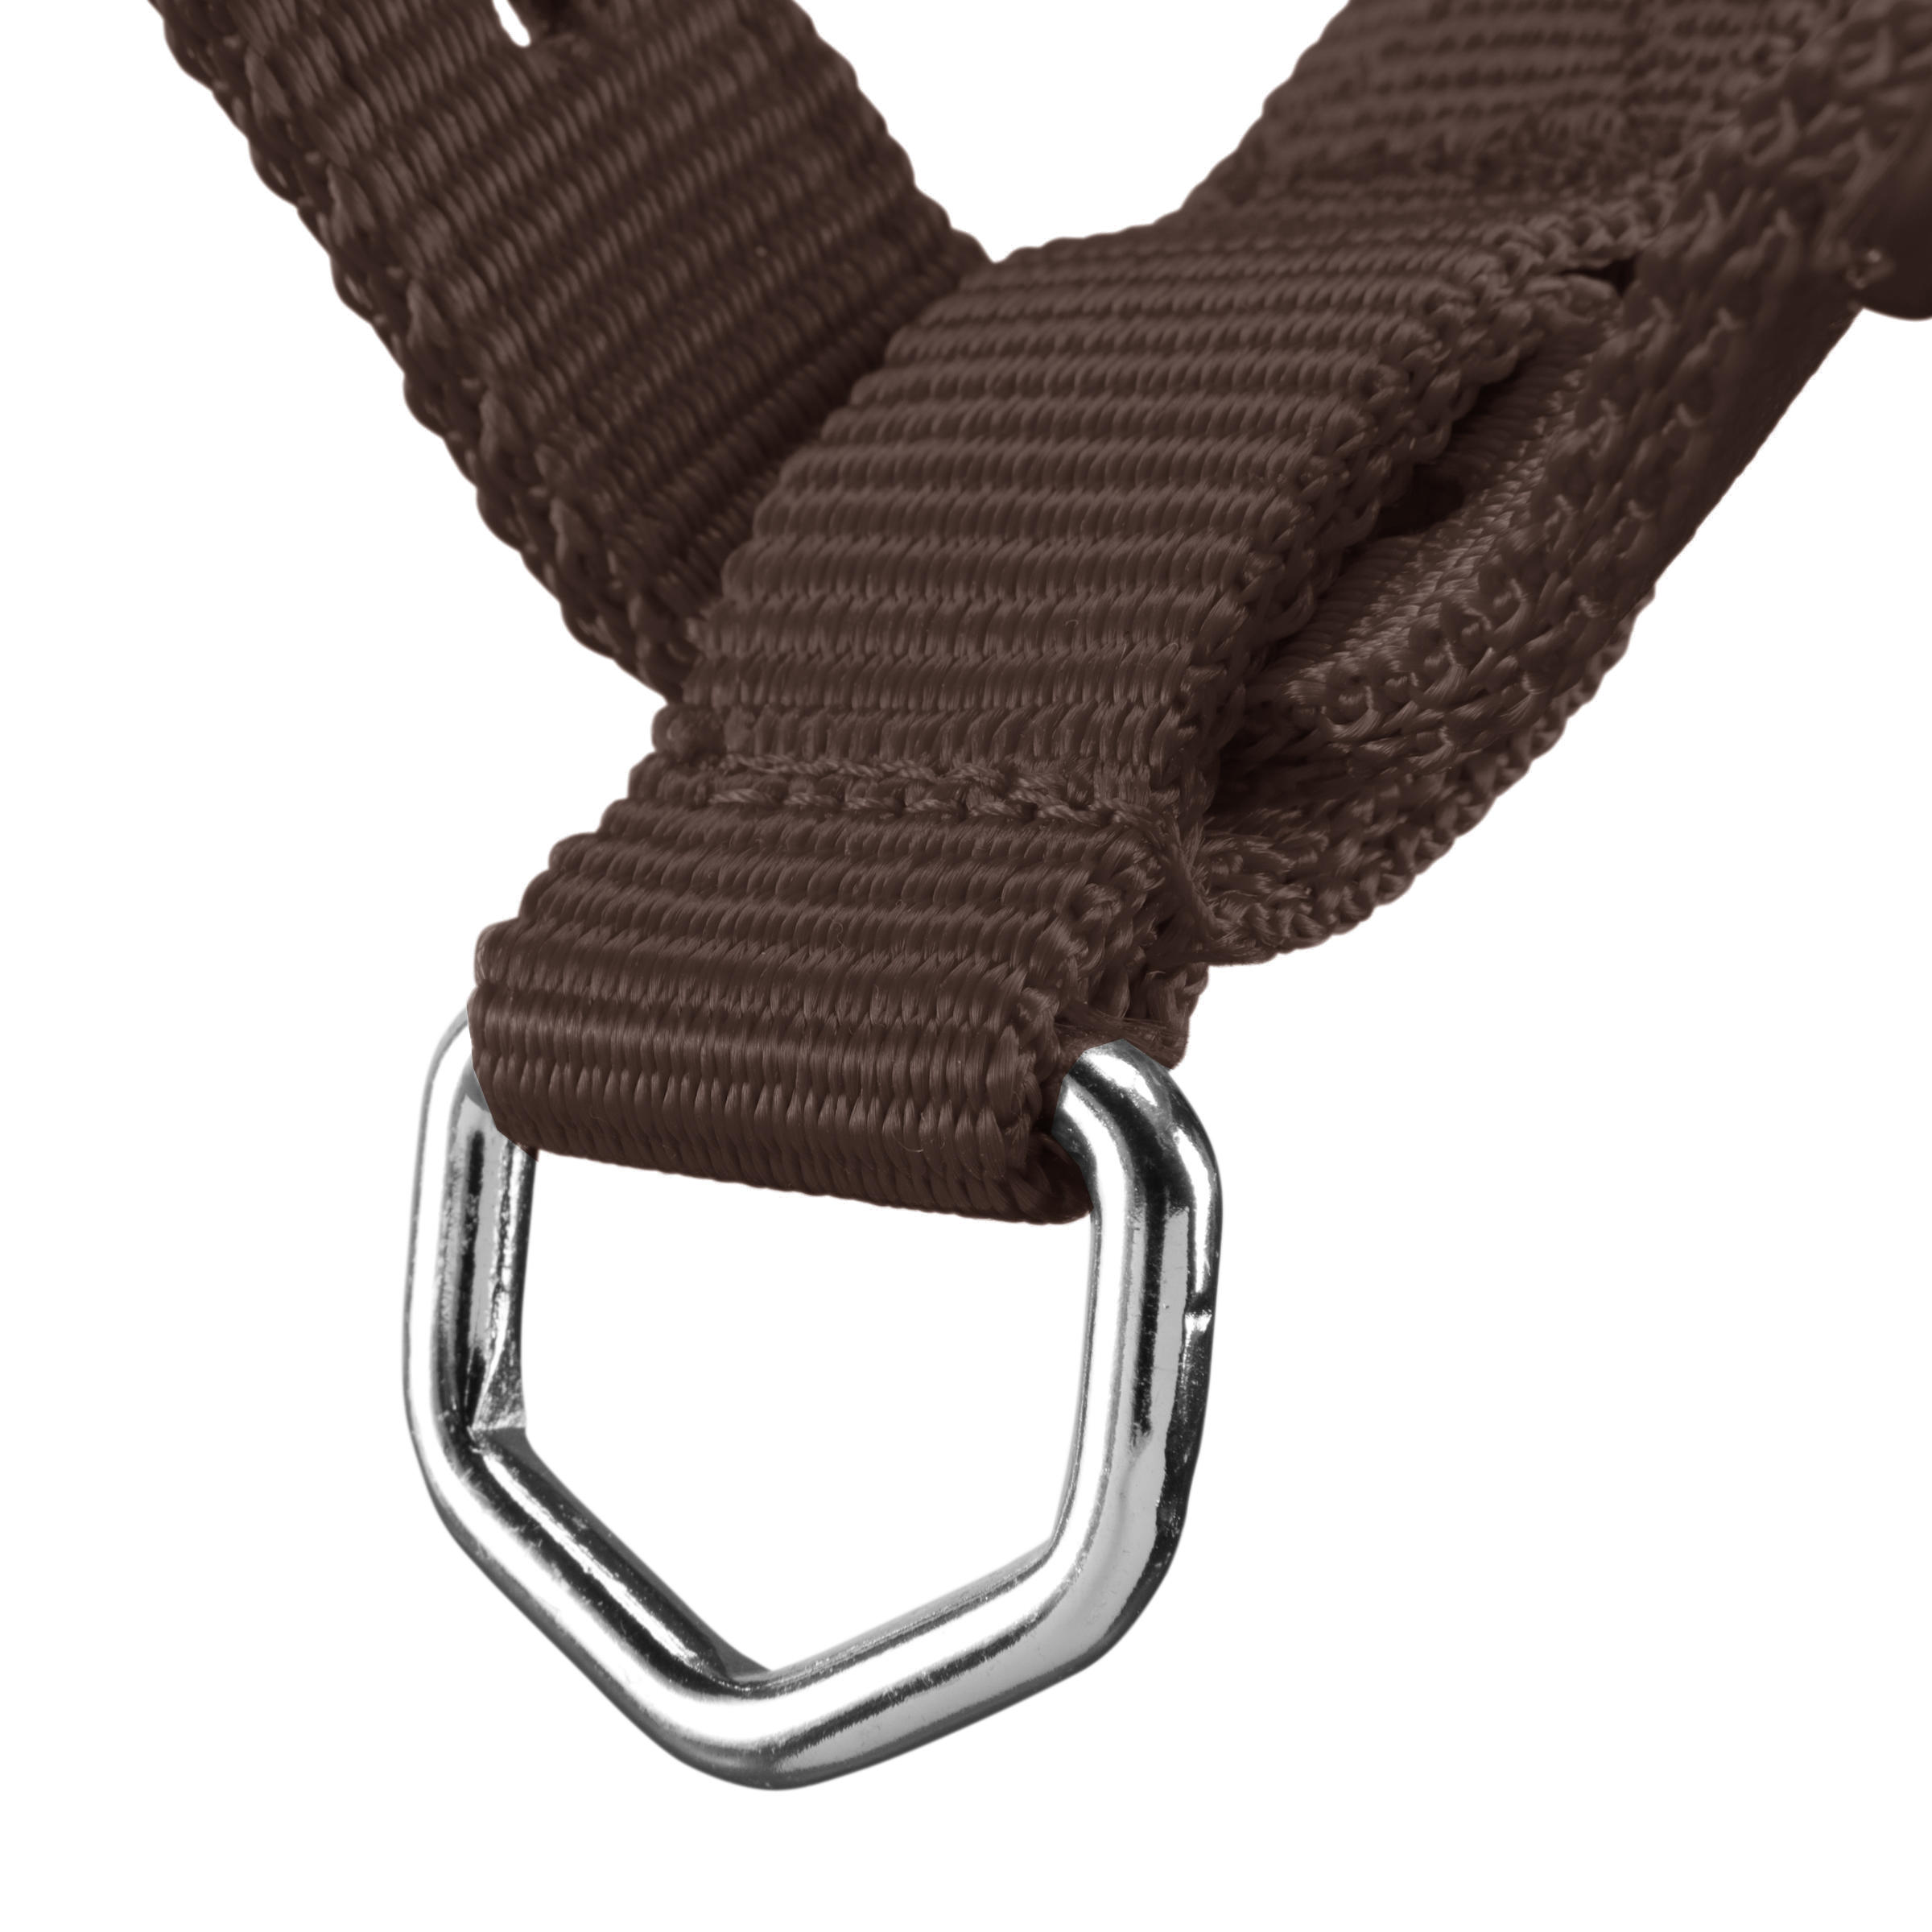 Schooling Horse Riding Halter for Horse and Pony - Brown 4/8